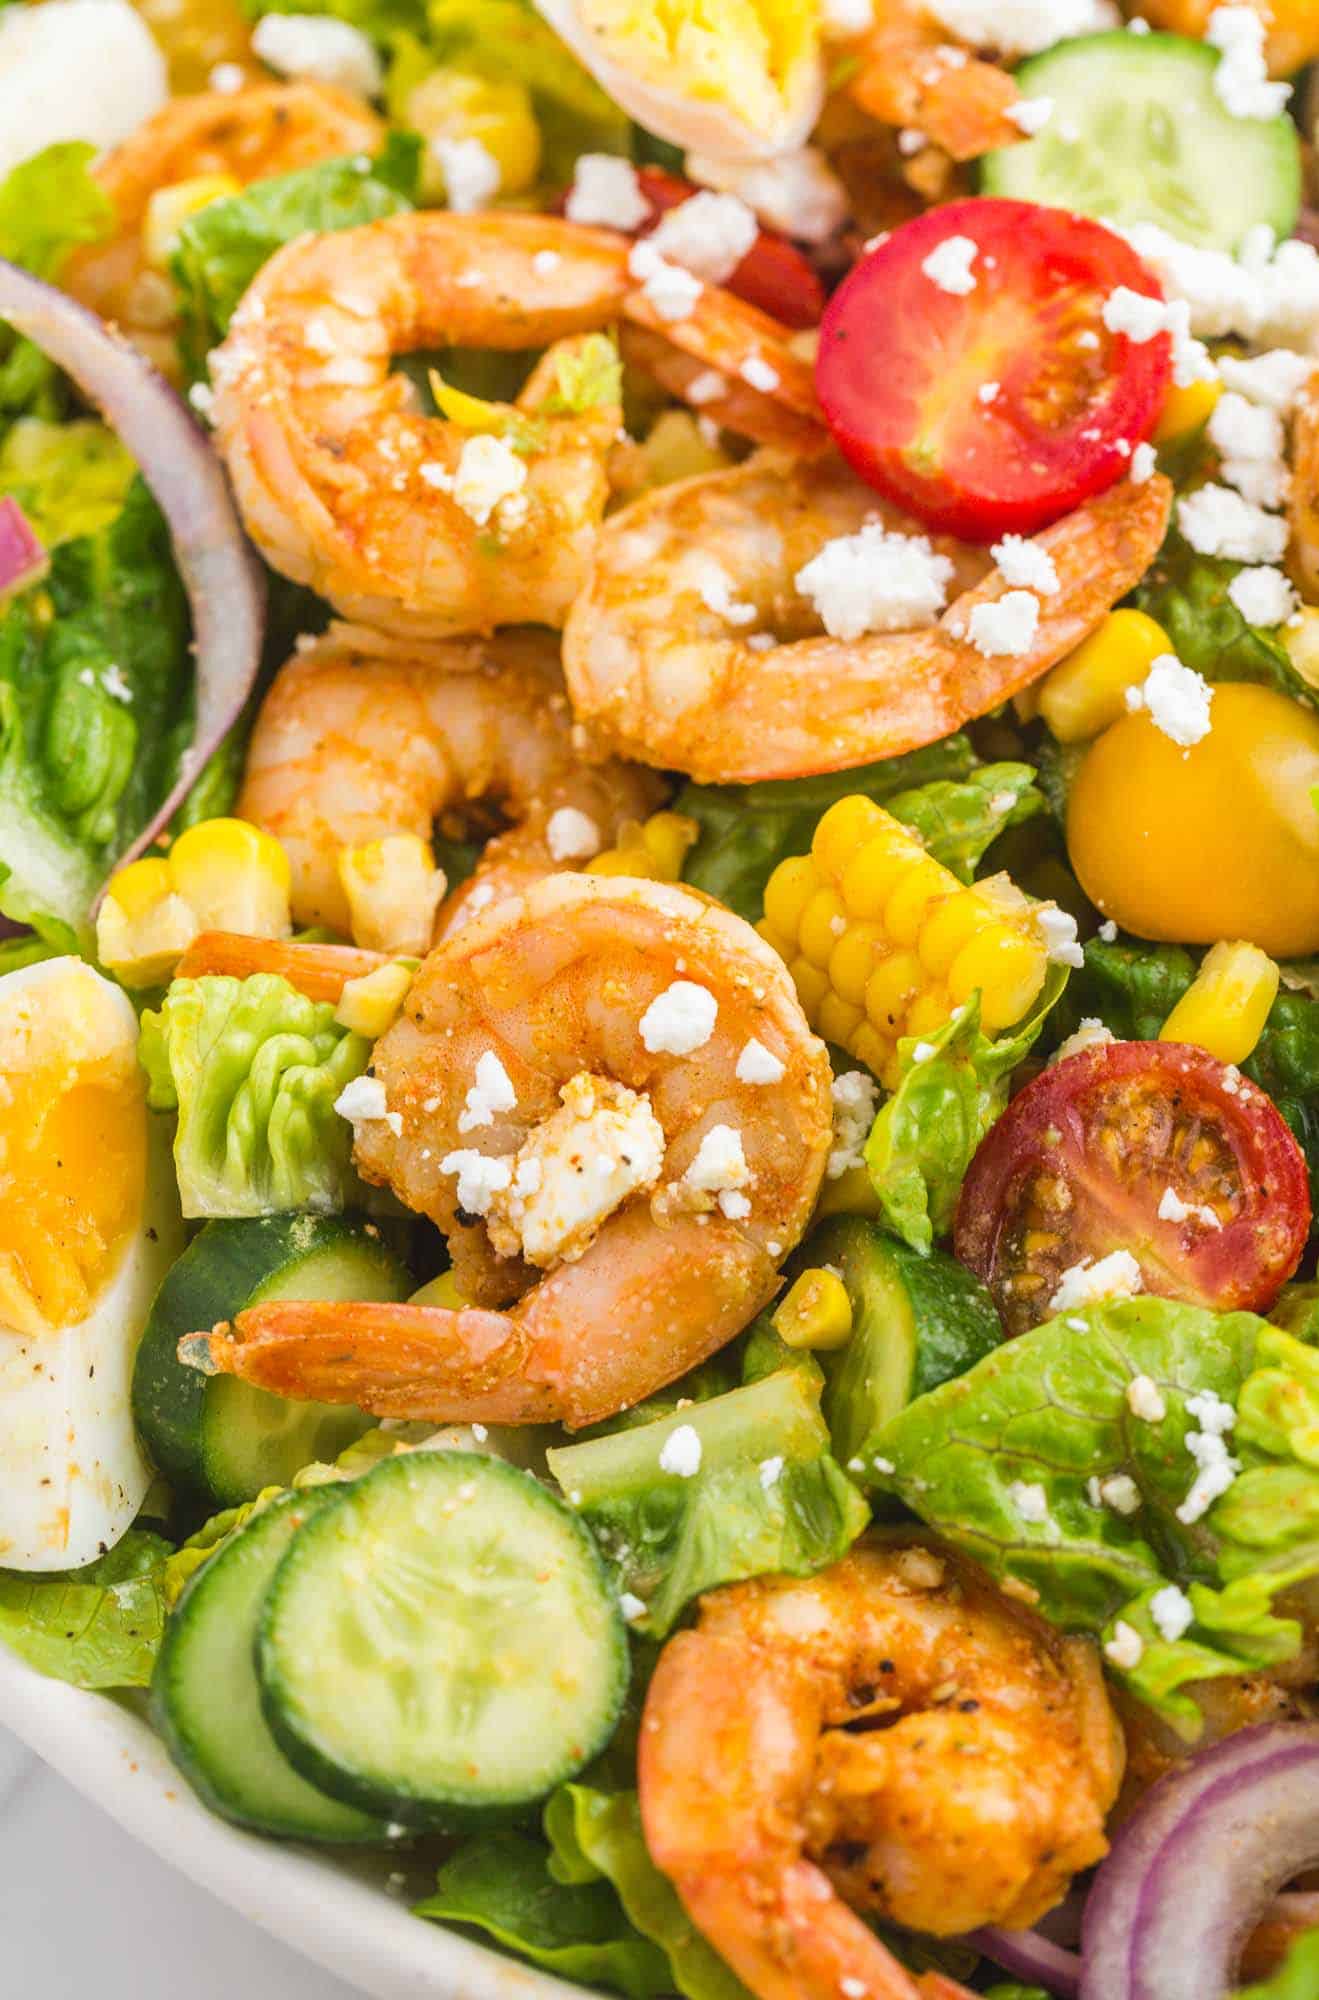 Closeup view of a shrimp cobb salad after tossing with dressing